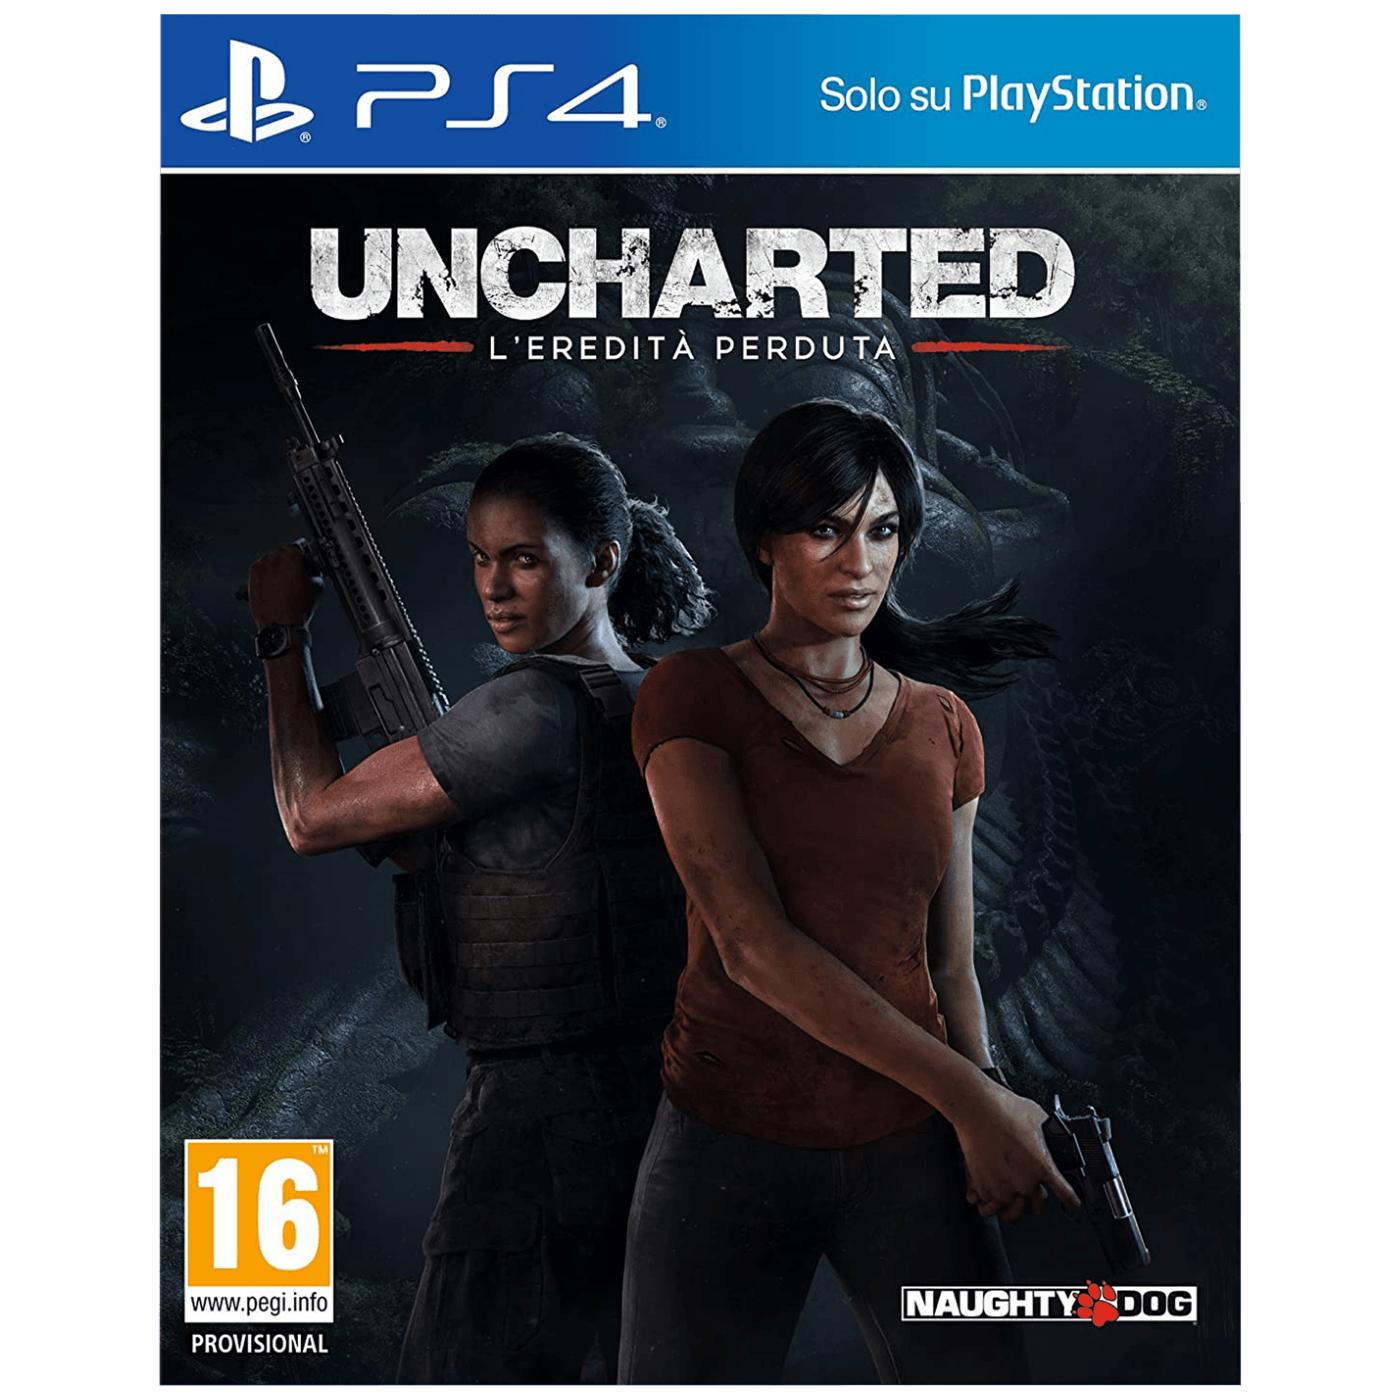 Igra za PlayStation 4: Uncharted: The Lost Legacy PS Hits